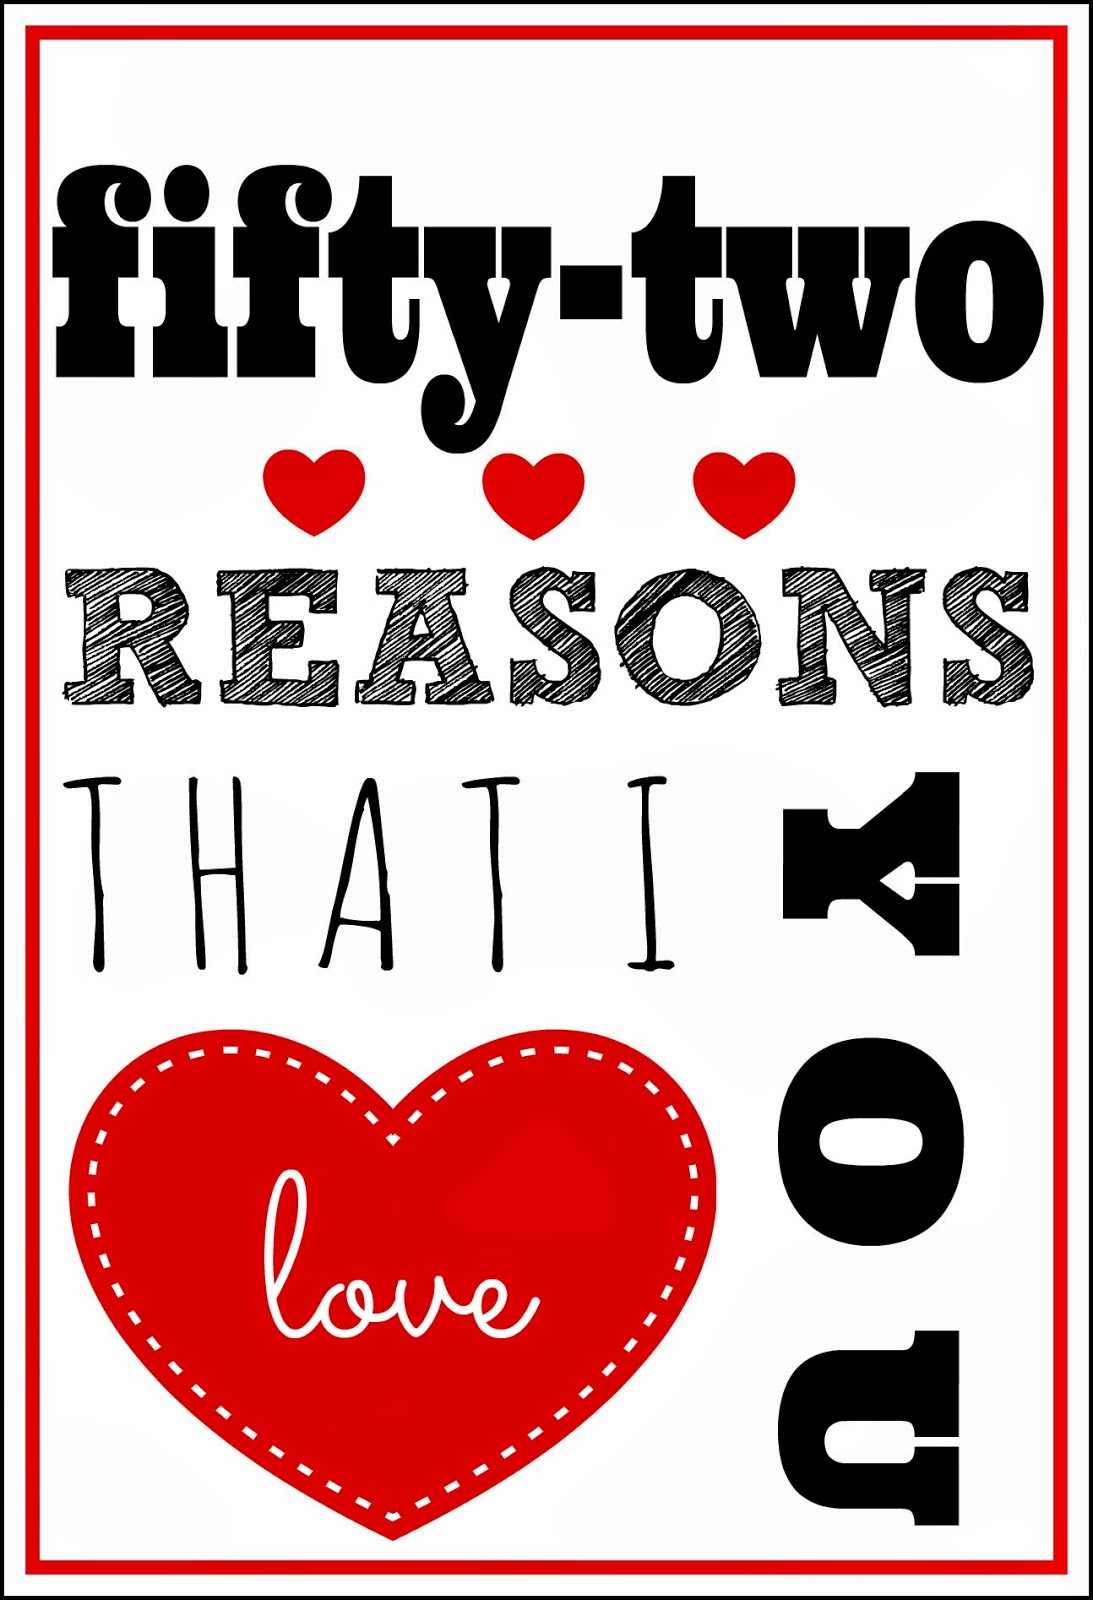 52 Reasons I Love You Template Free ] - 1000 Ideas About 52 Throughout 52 Reasons Why I Love You Cards Templates Free